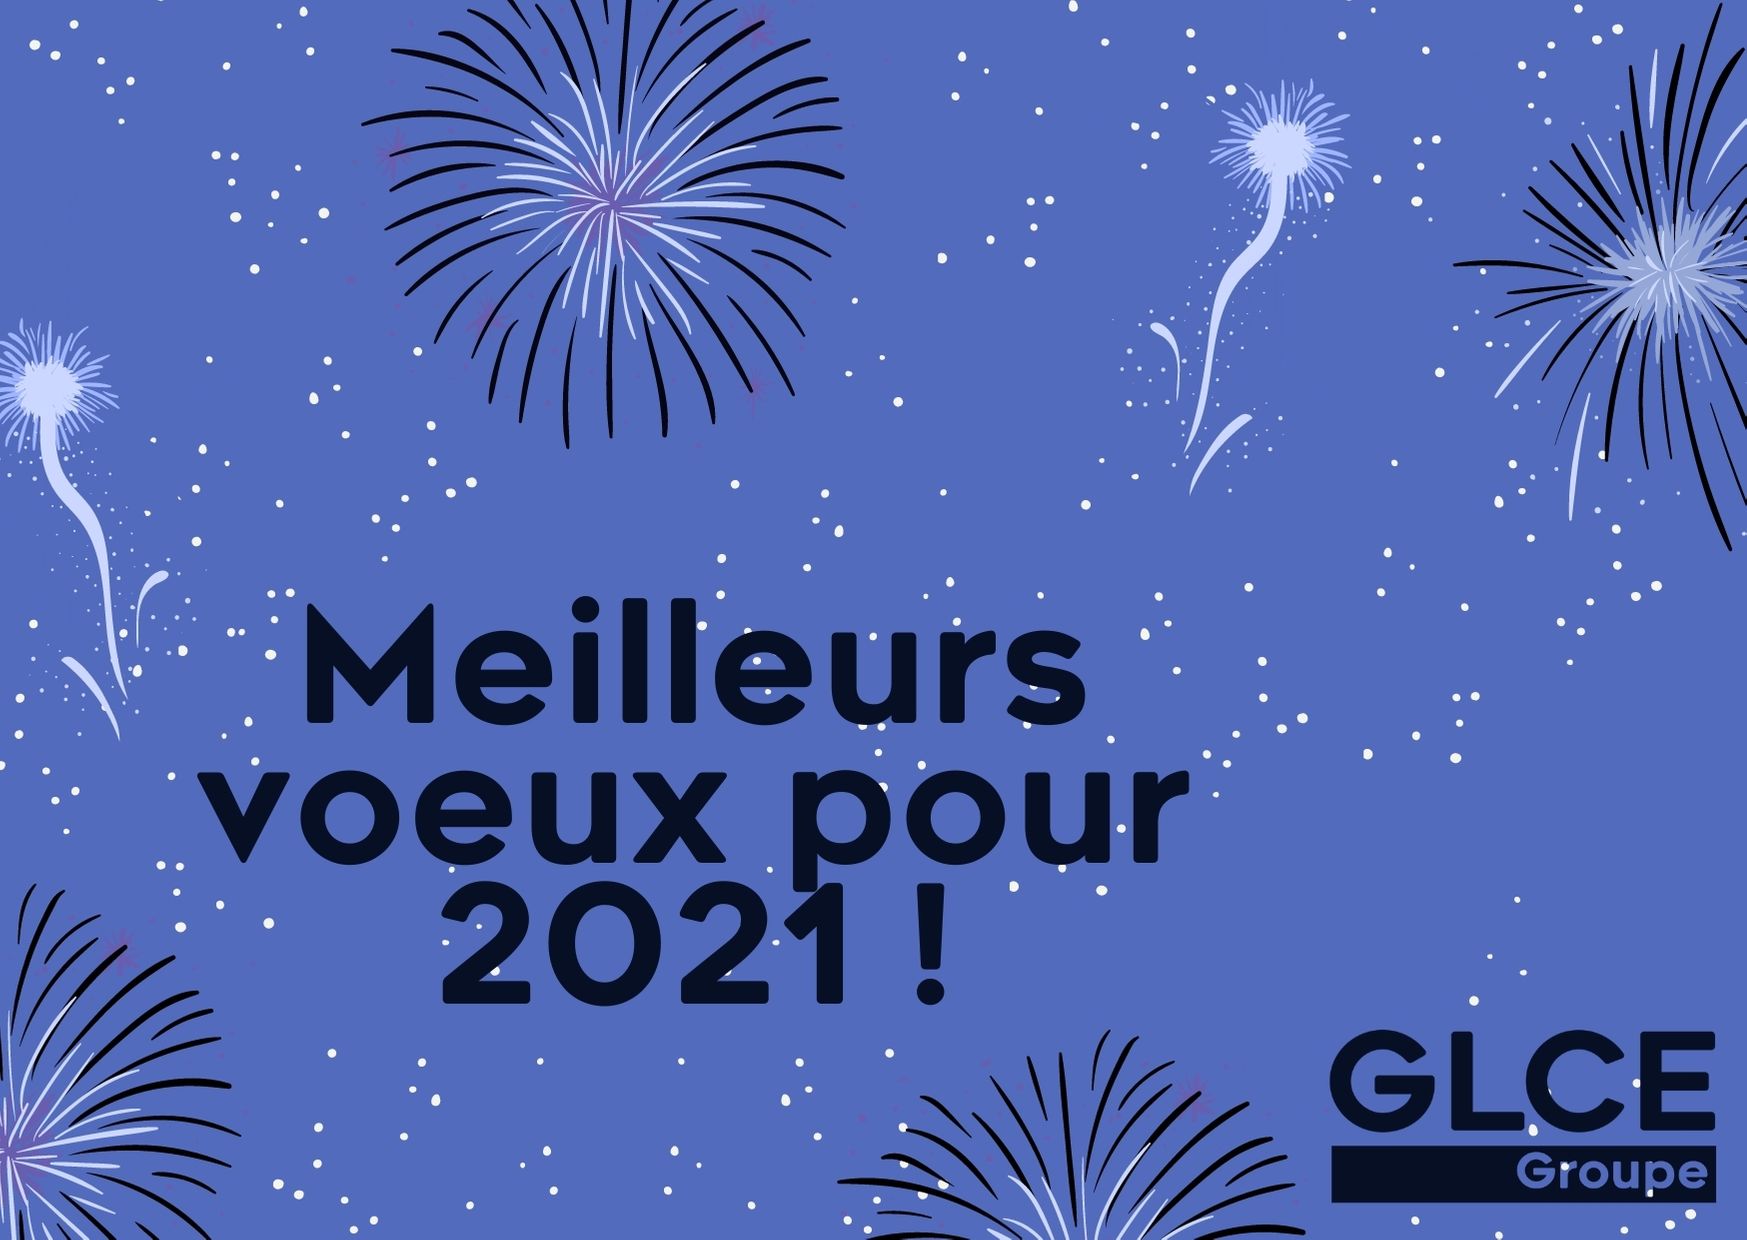 Meilleurs voeux 2021 Groupe GLCE